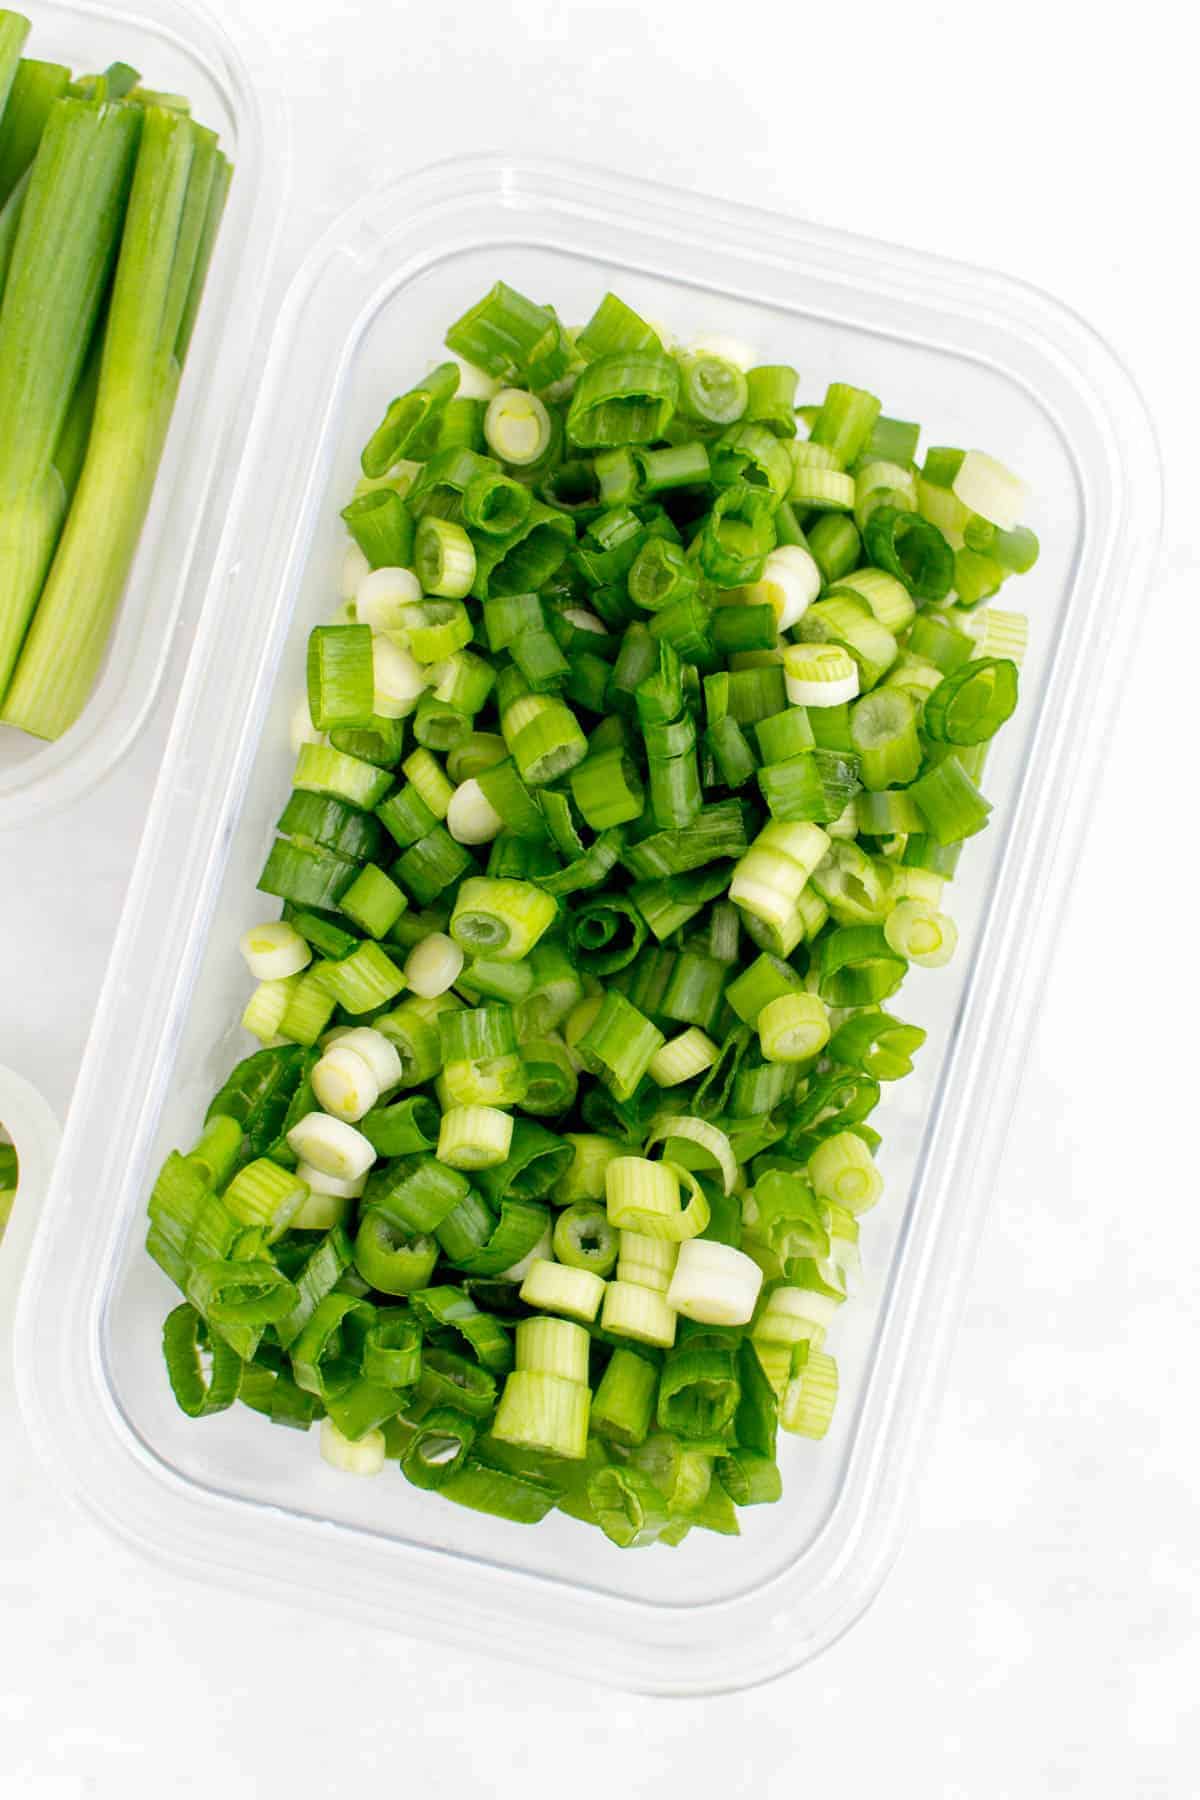 https://carmyy.com/wp-content/uploads/2021/02/how-to-freeze-green-onions-2.jpg